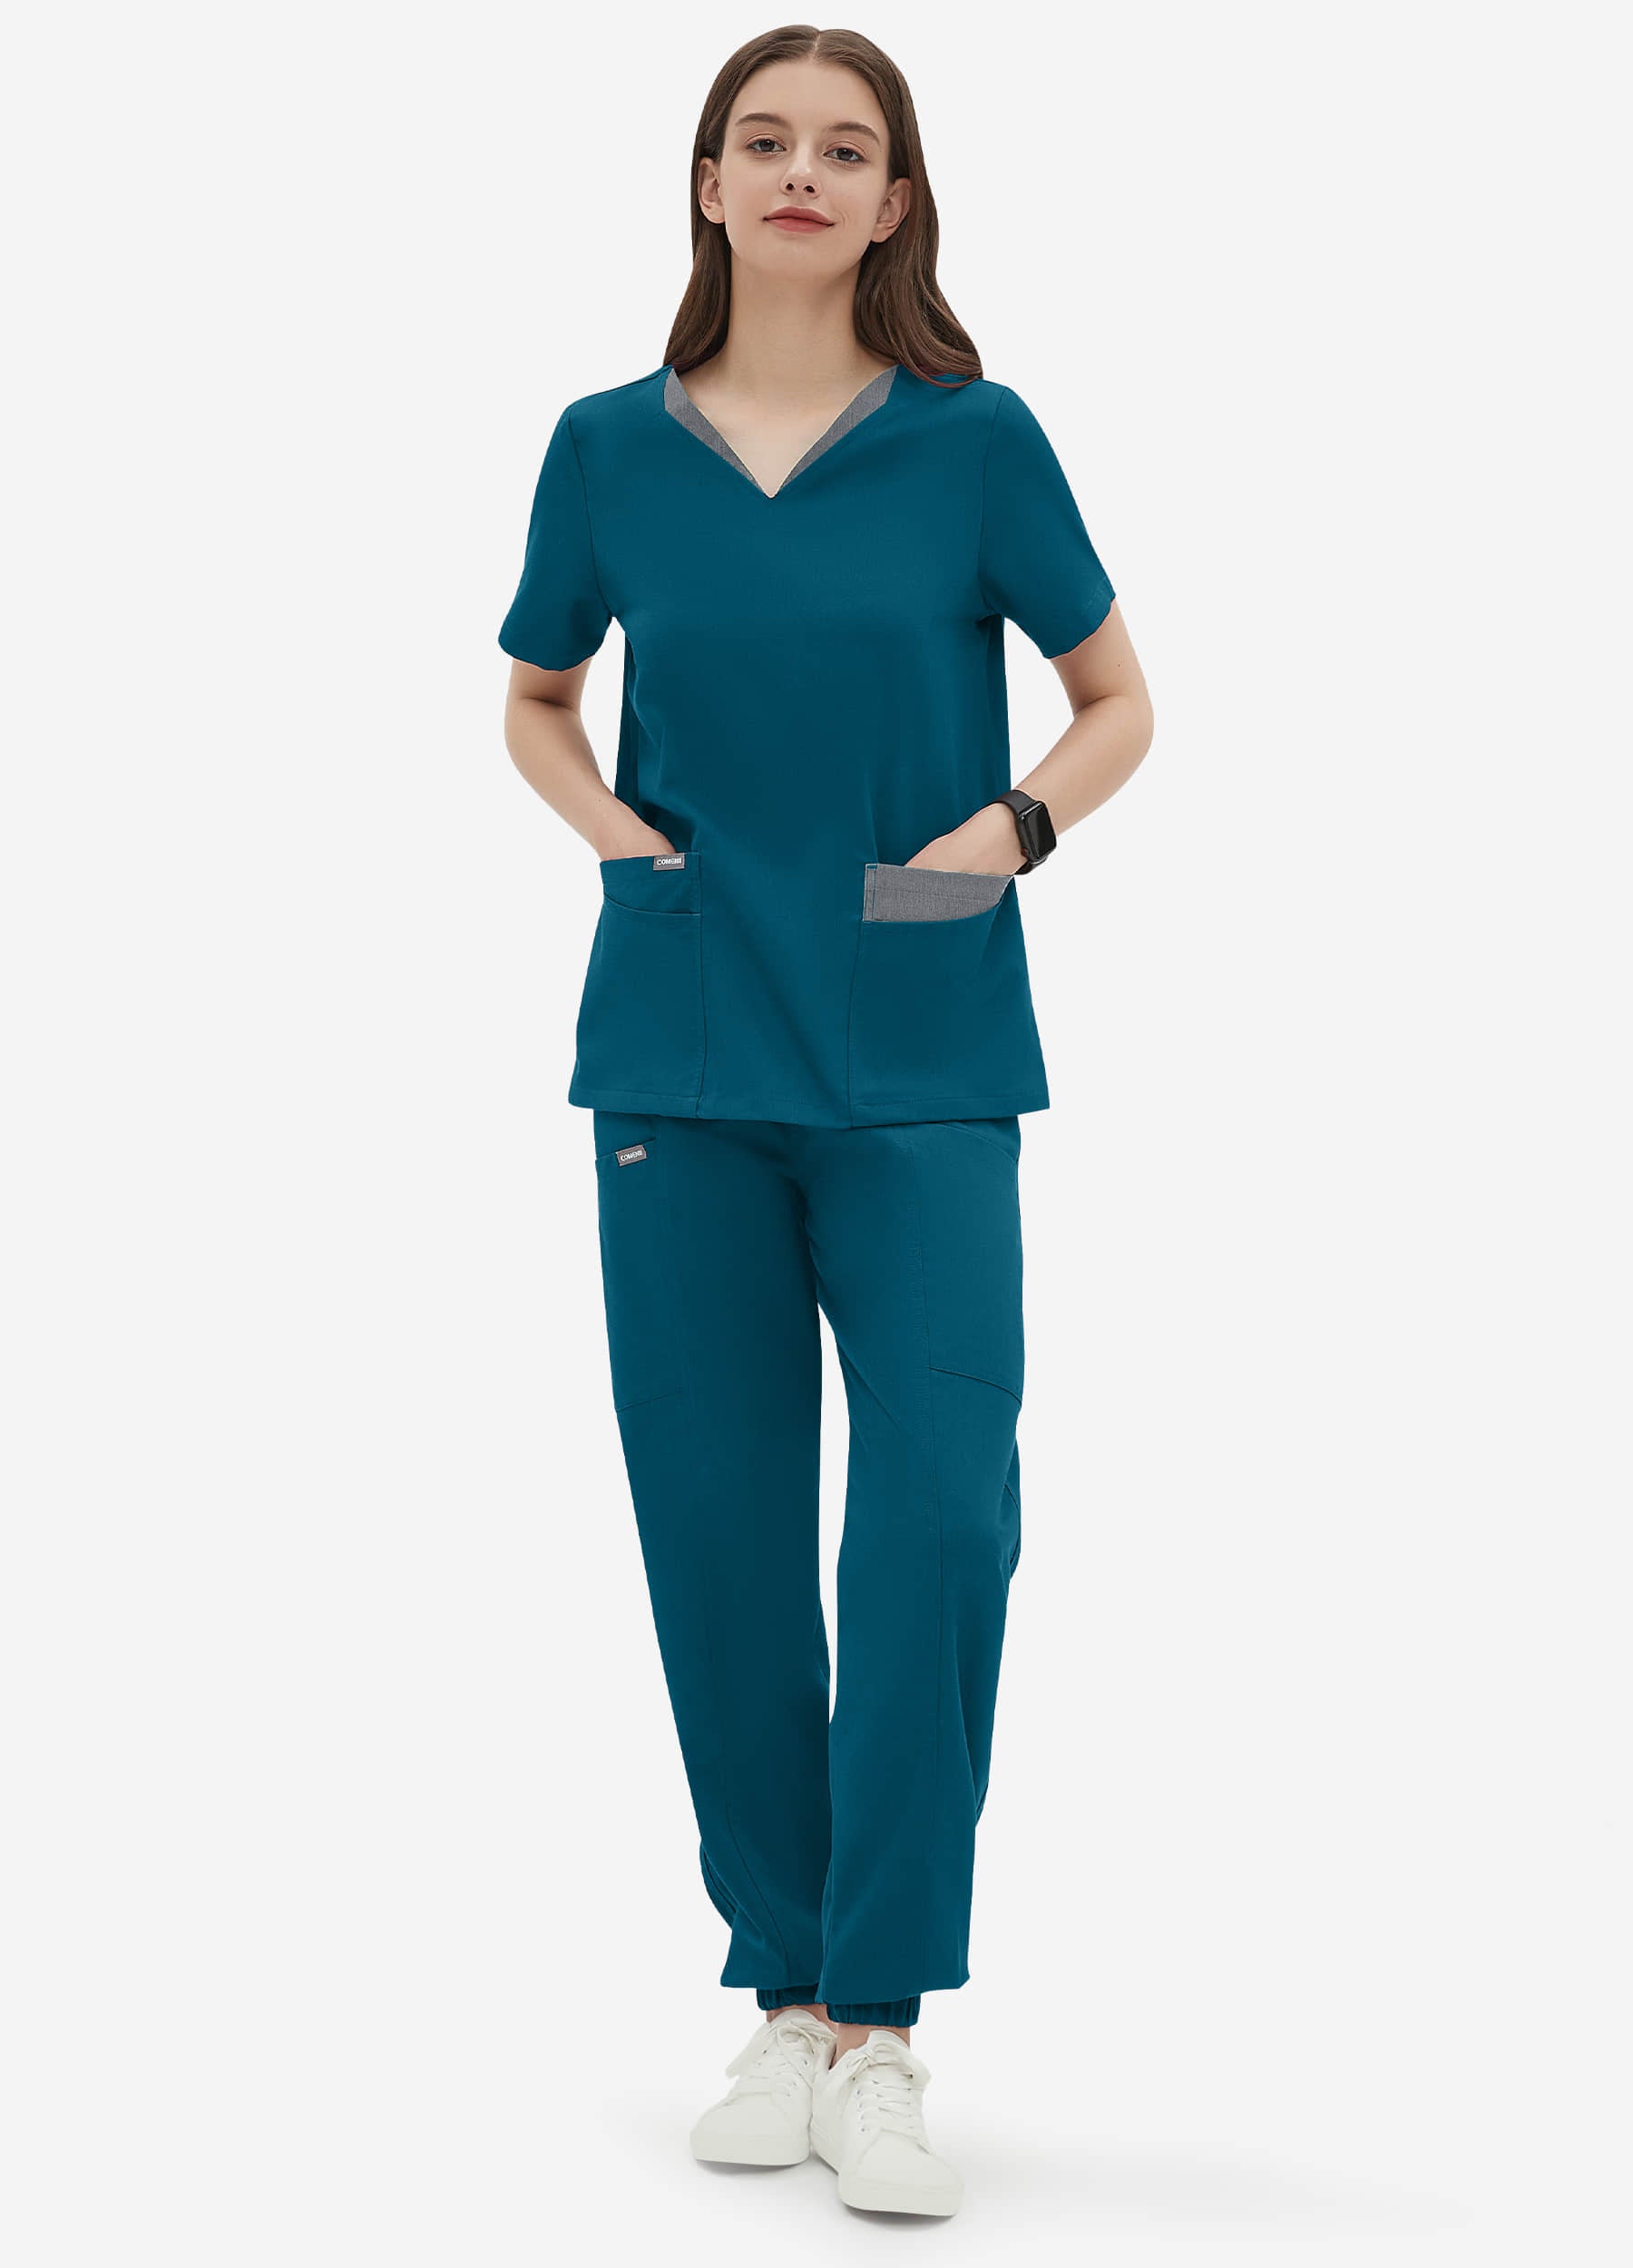 StyleFlex™ Double-Layer Colors Scrub Top